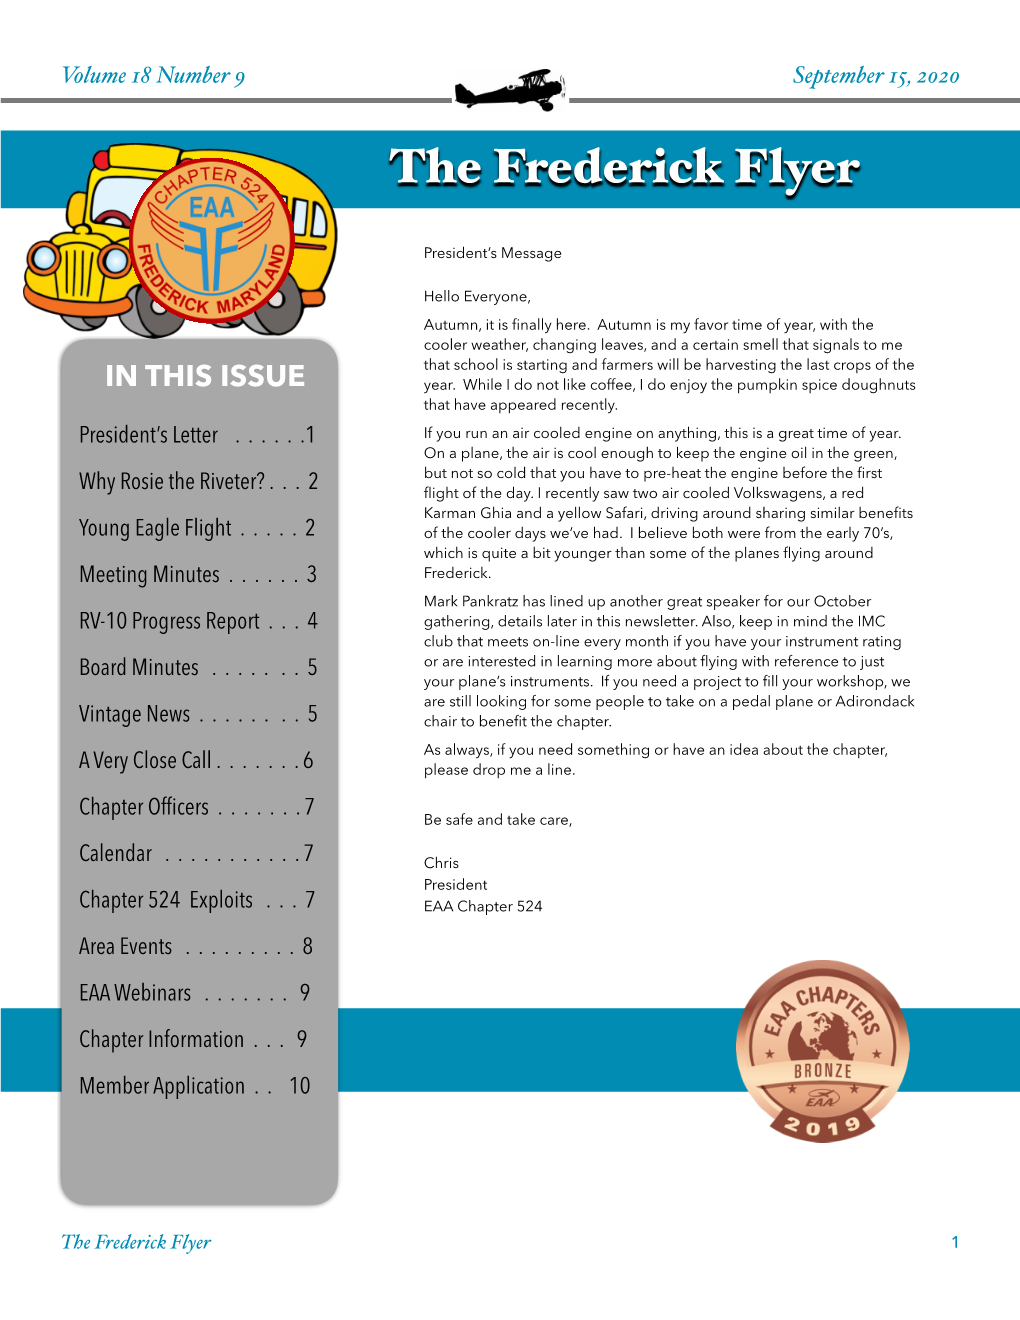 The Frederick Flyer